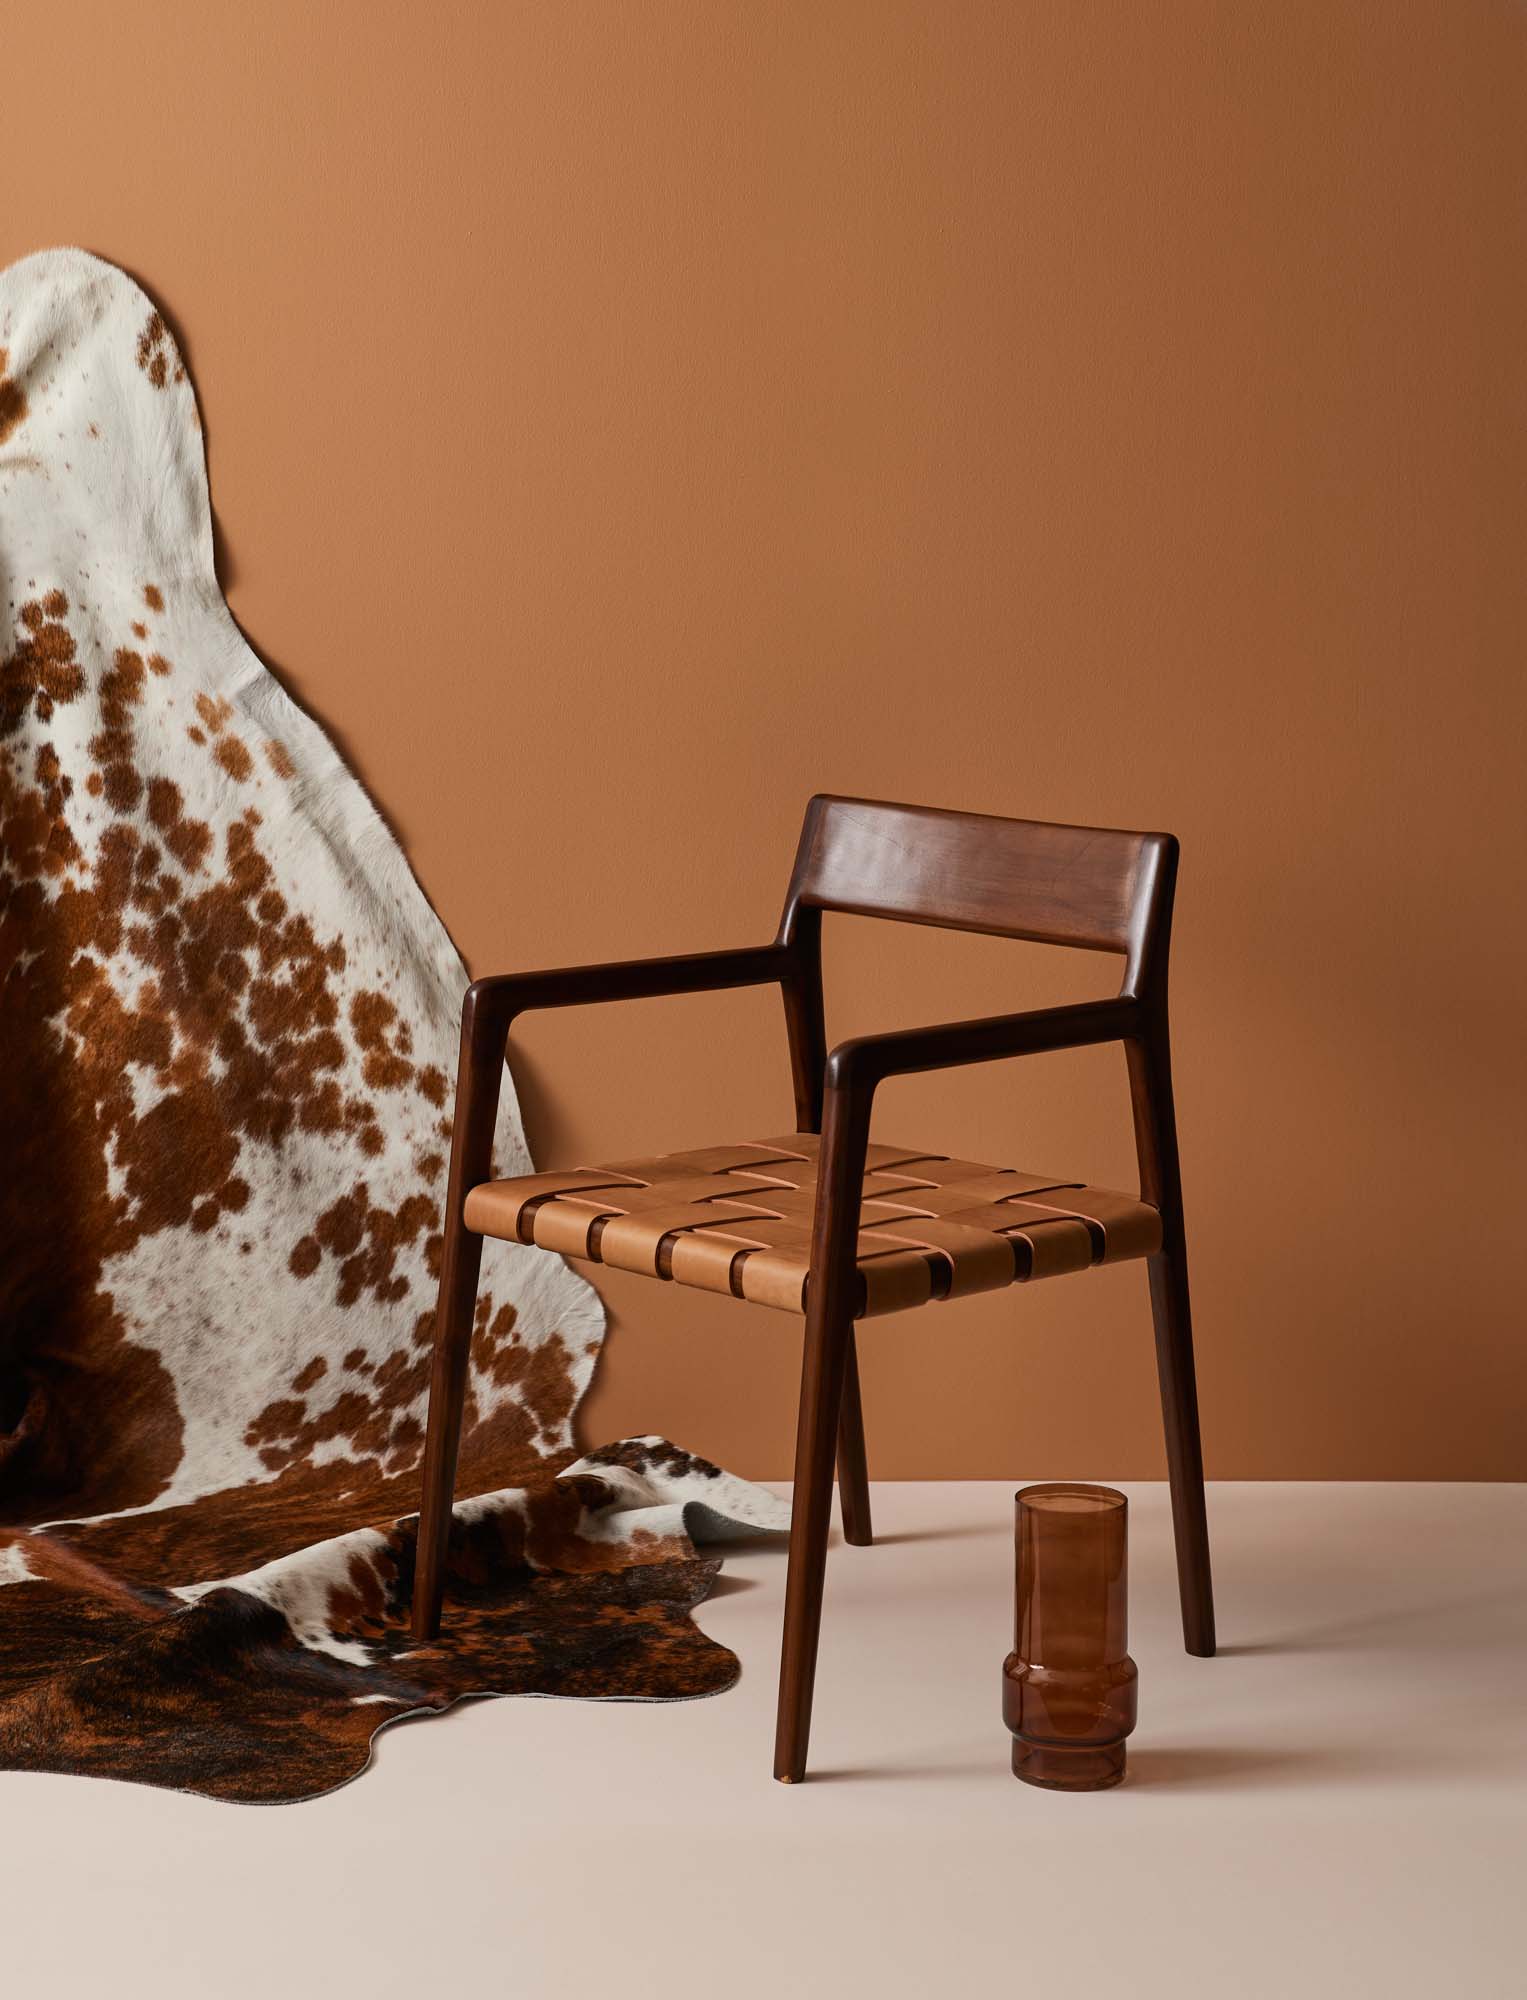 Image with brown wall, cowhide rug and walnut chair and cinnamon vase